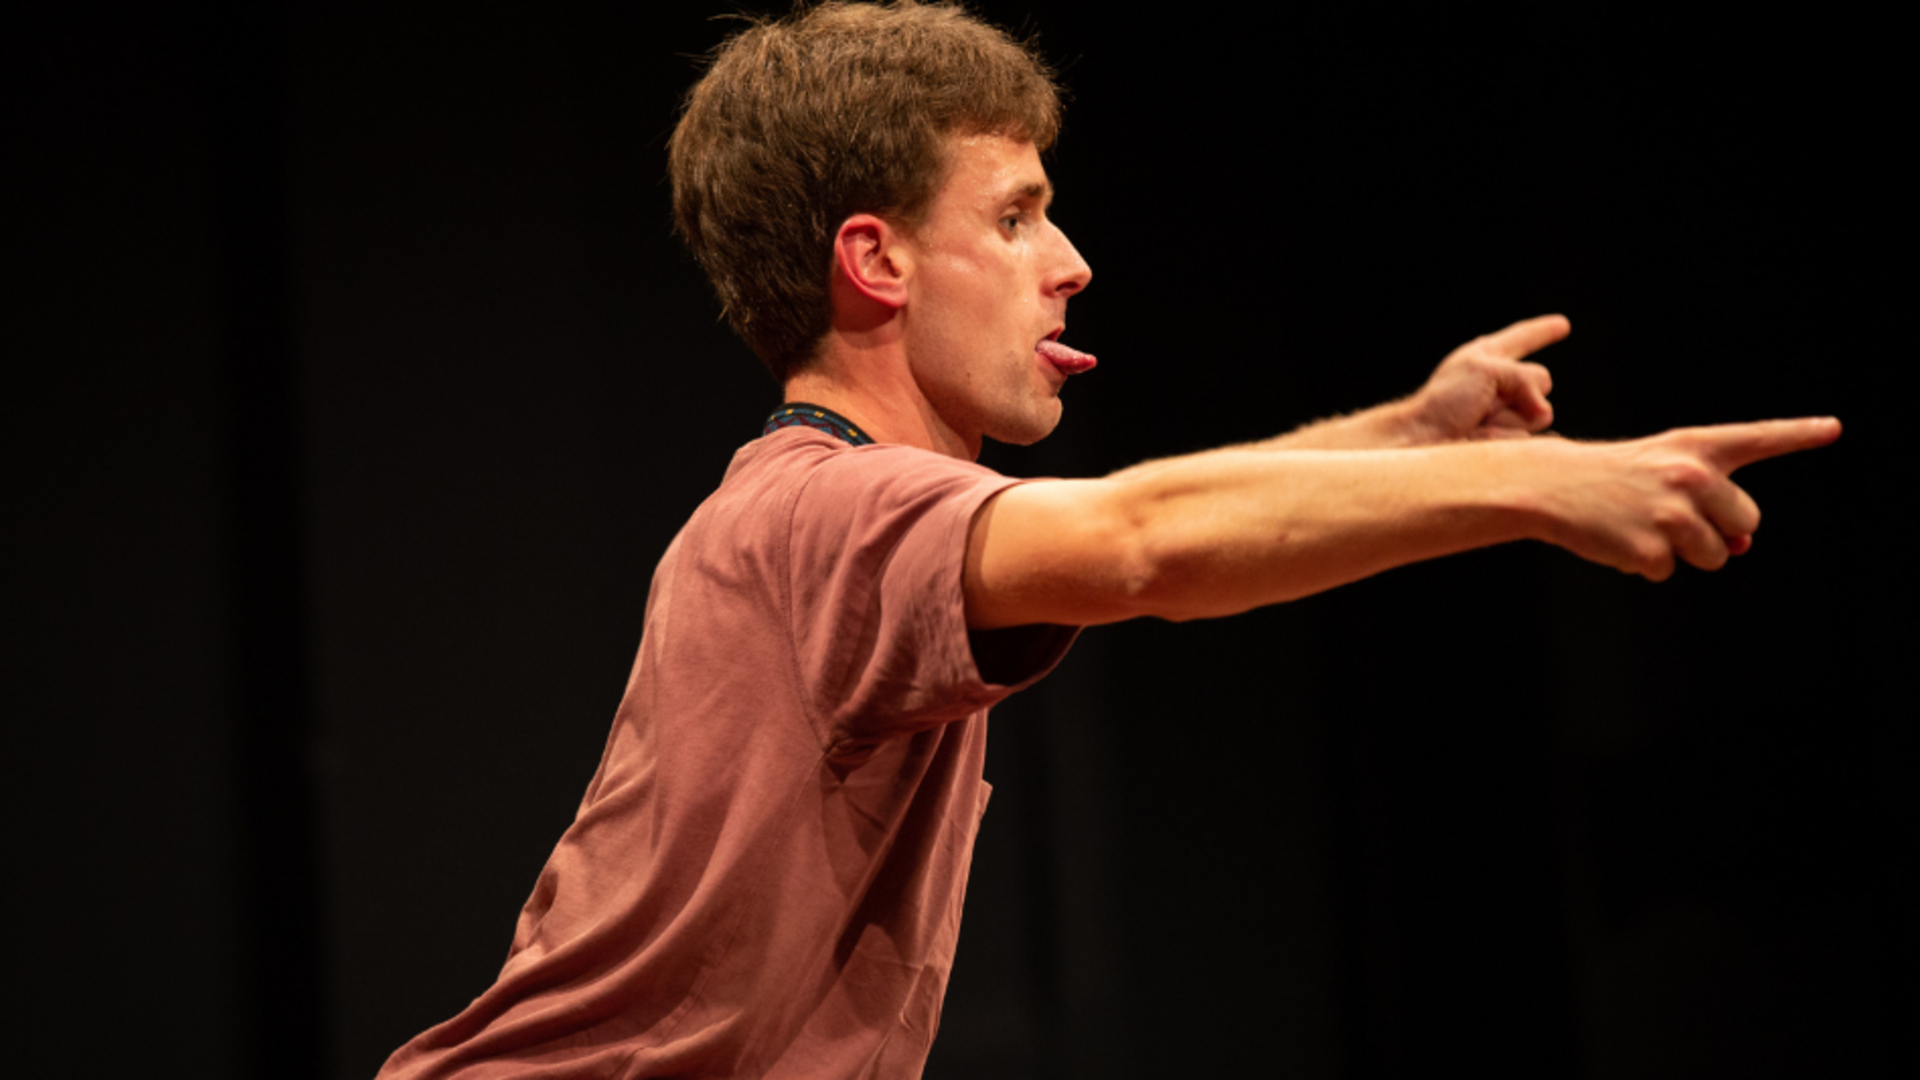 Dancer Thomas Woodman facing sideways in a dance studio. He wears a brown tshirt. He reaching his arms forwards with his fingers pointing. He is also sticking his tongue out.